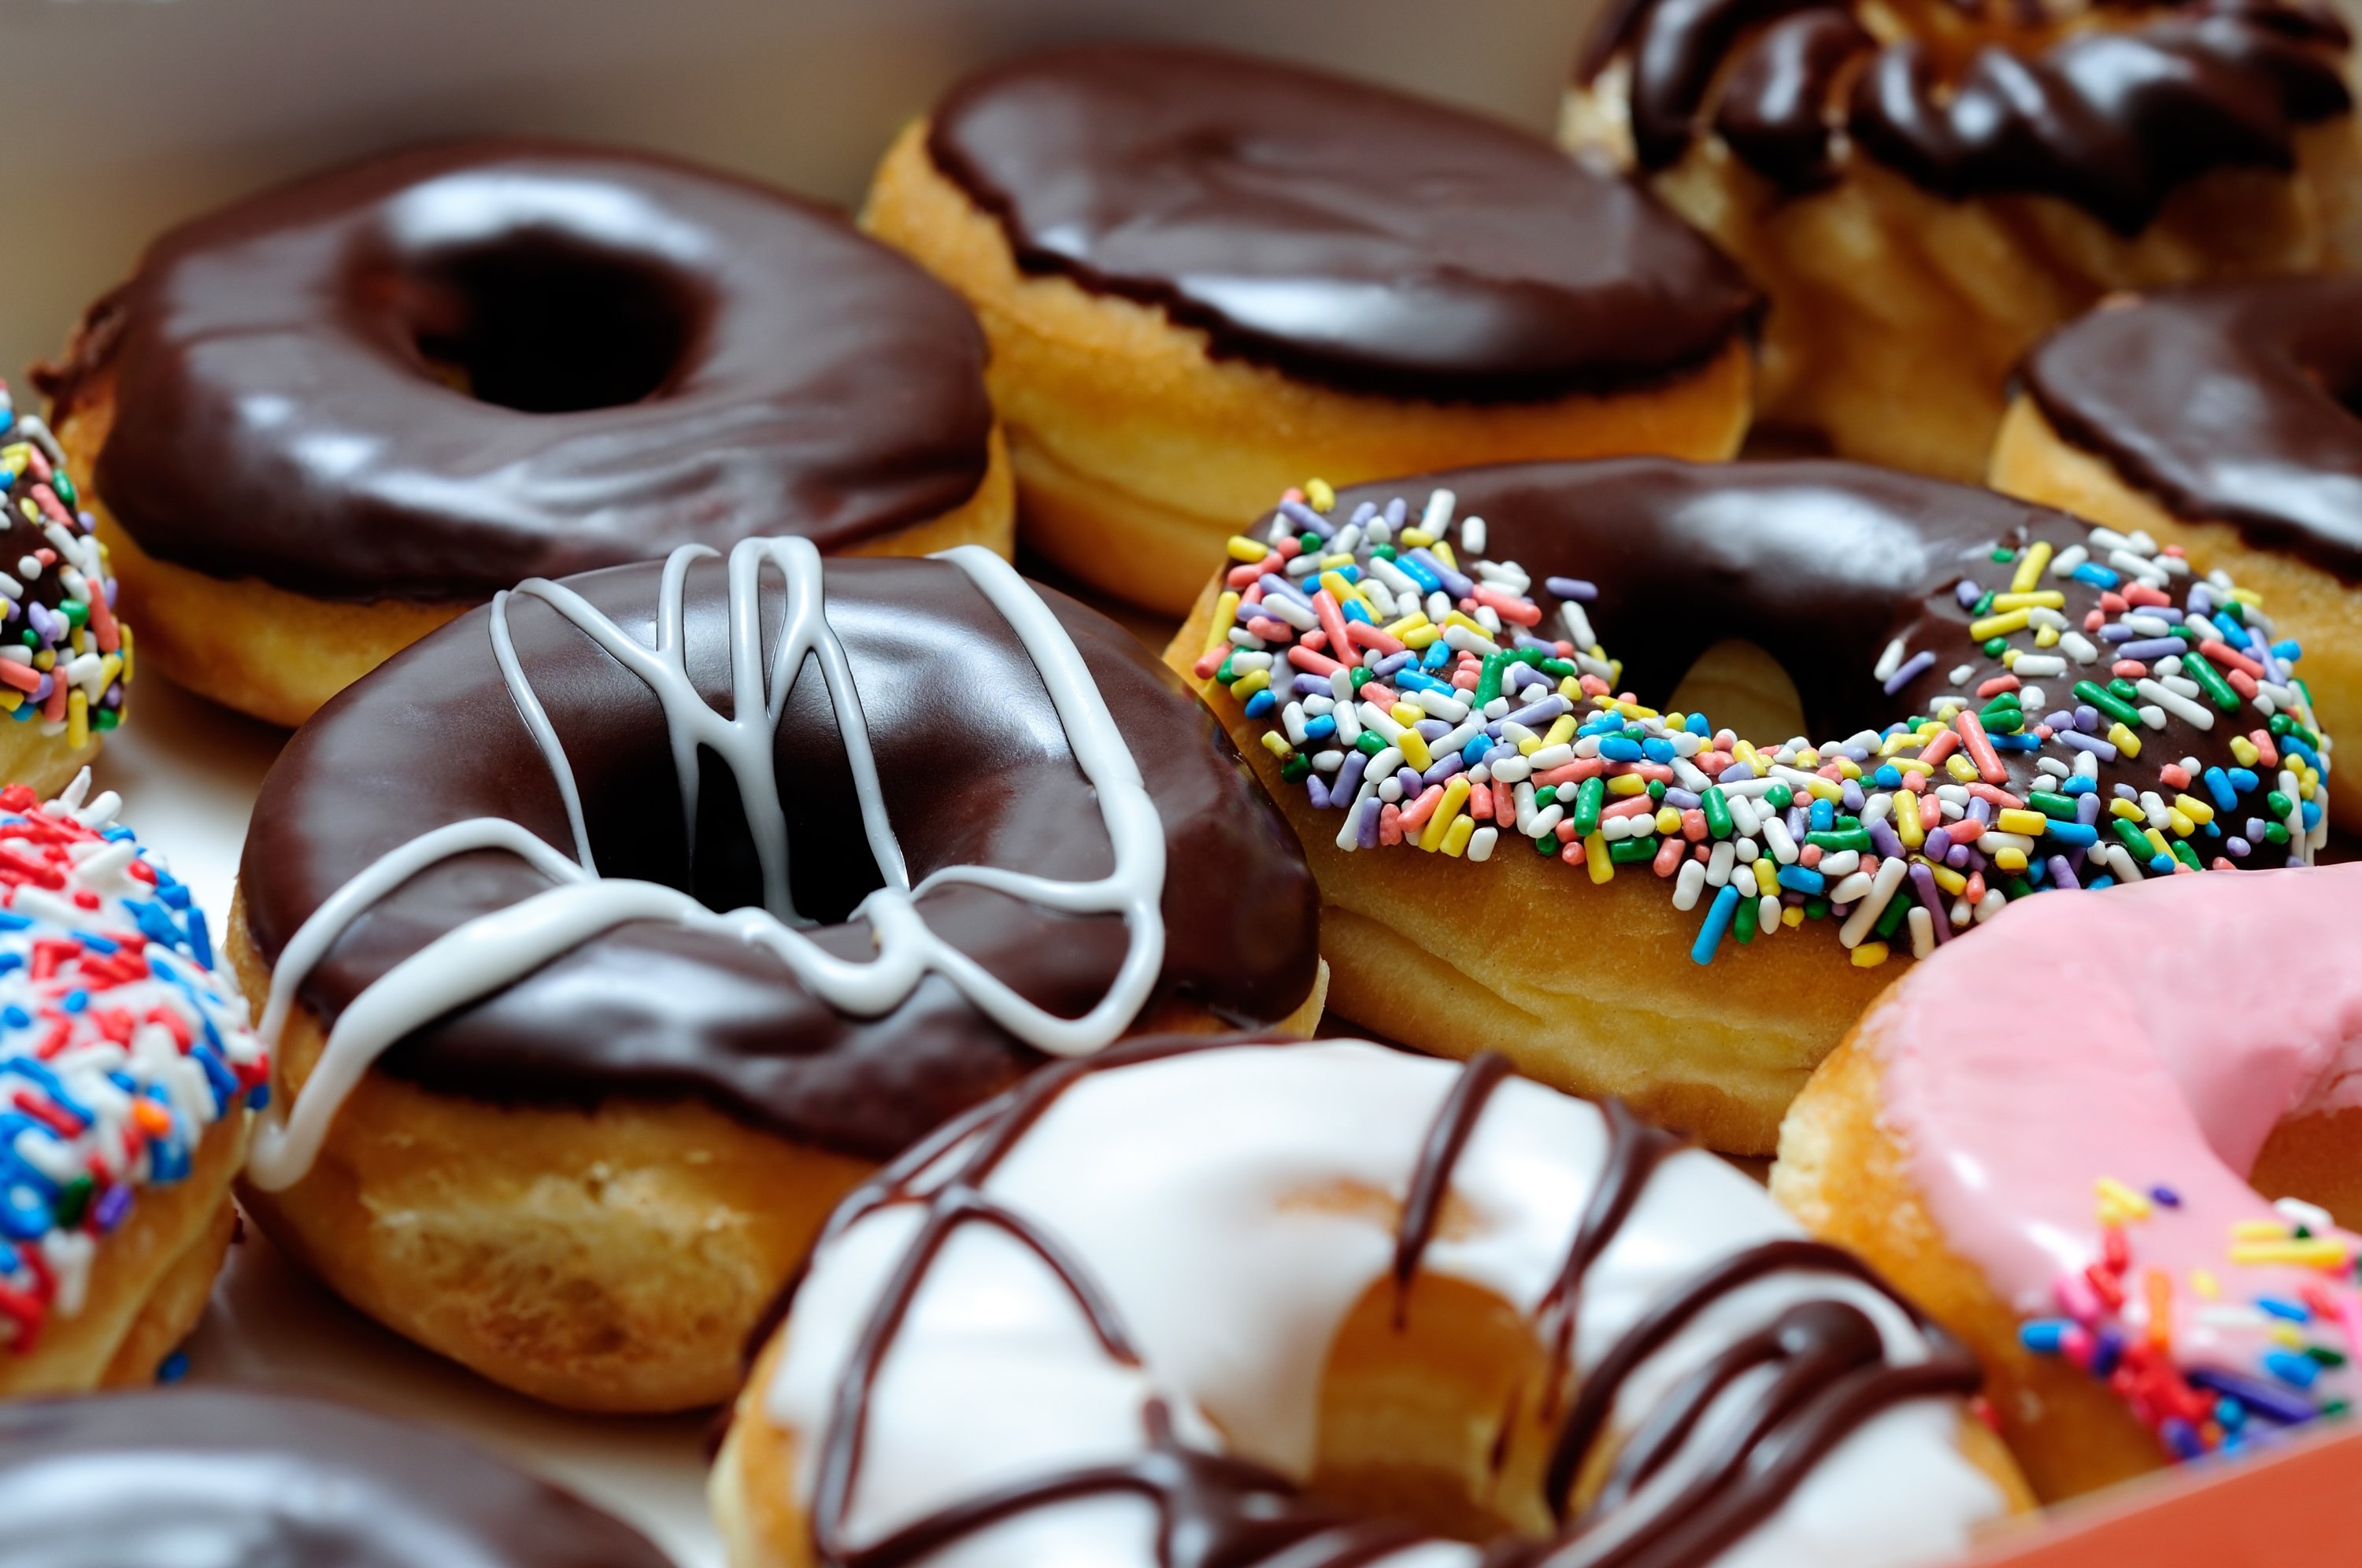 Donut: Glazed with sugar icing, spread with icing or chocolate, or topped with powdered sugar, cinnamon, sprinkles, or fruit. 3000x2000 HD Background.